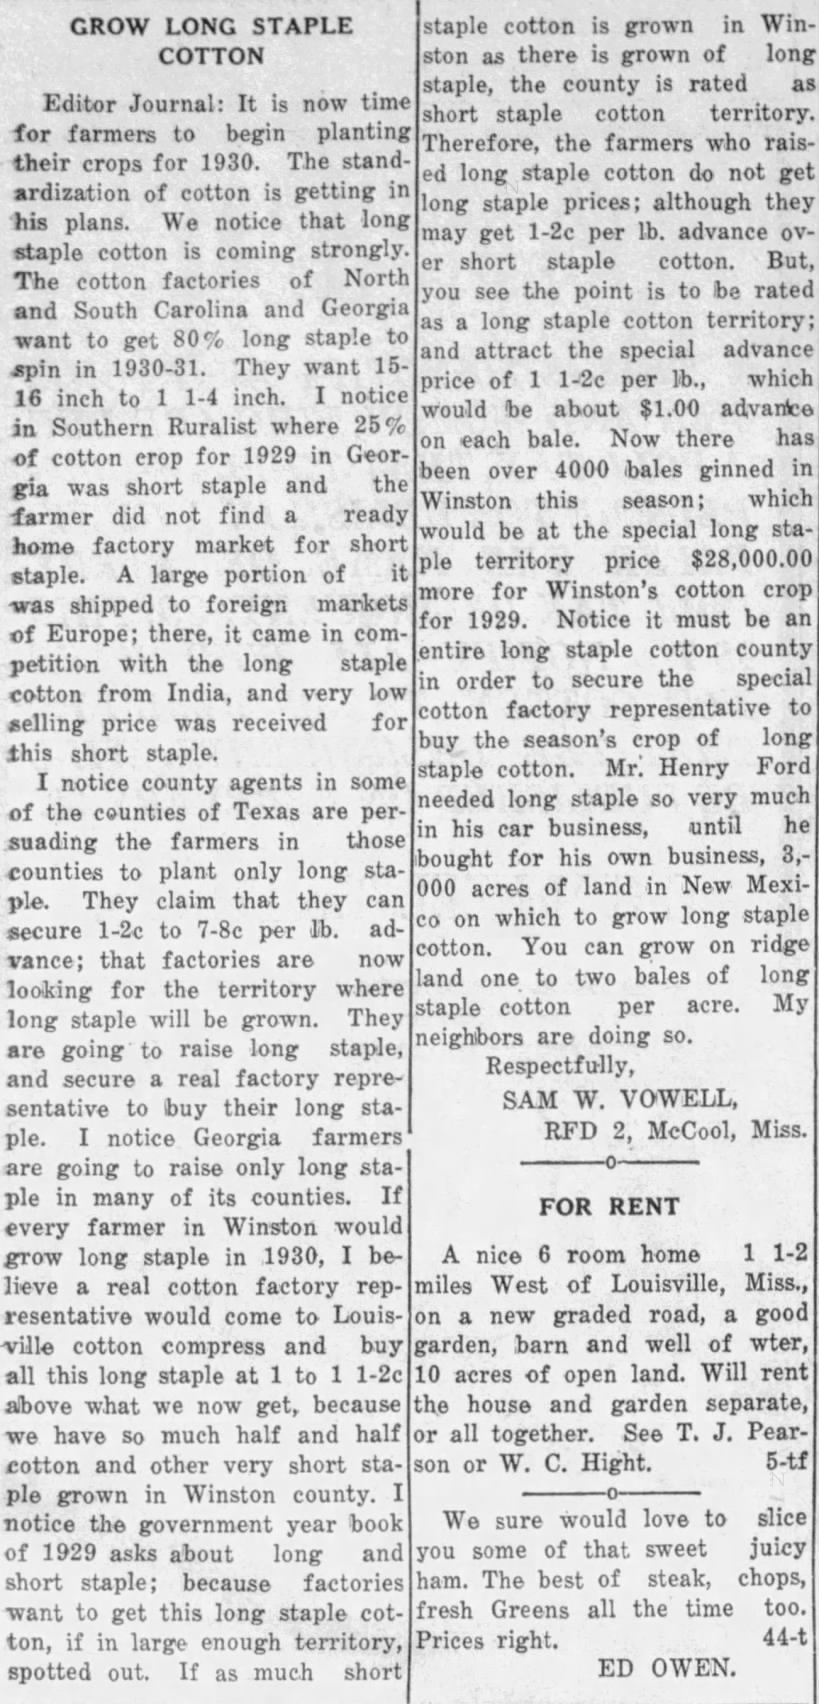 Sam Vowell Letter on Cotton
- 14 Feb 1930